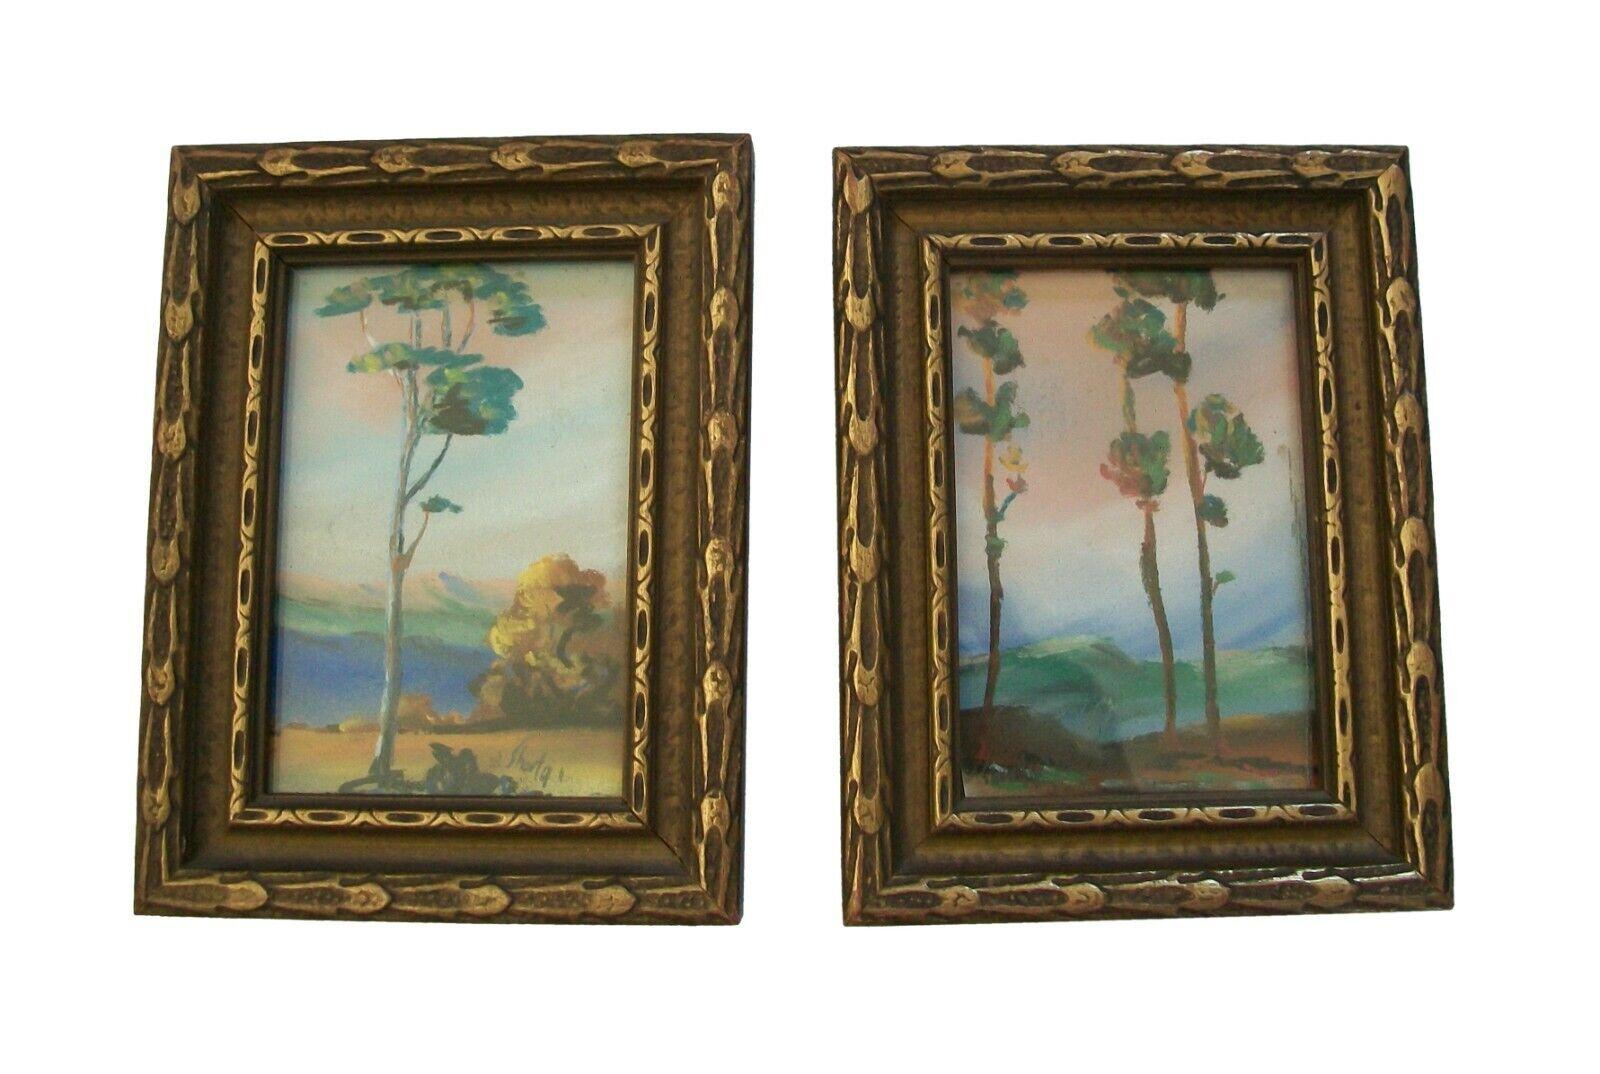 Miniature Pair of American Impressionist Framed Landscape Paintings, Circa 1900 For Sale 5